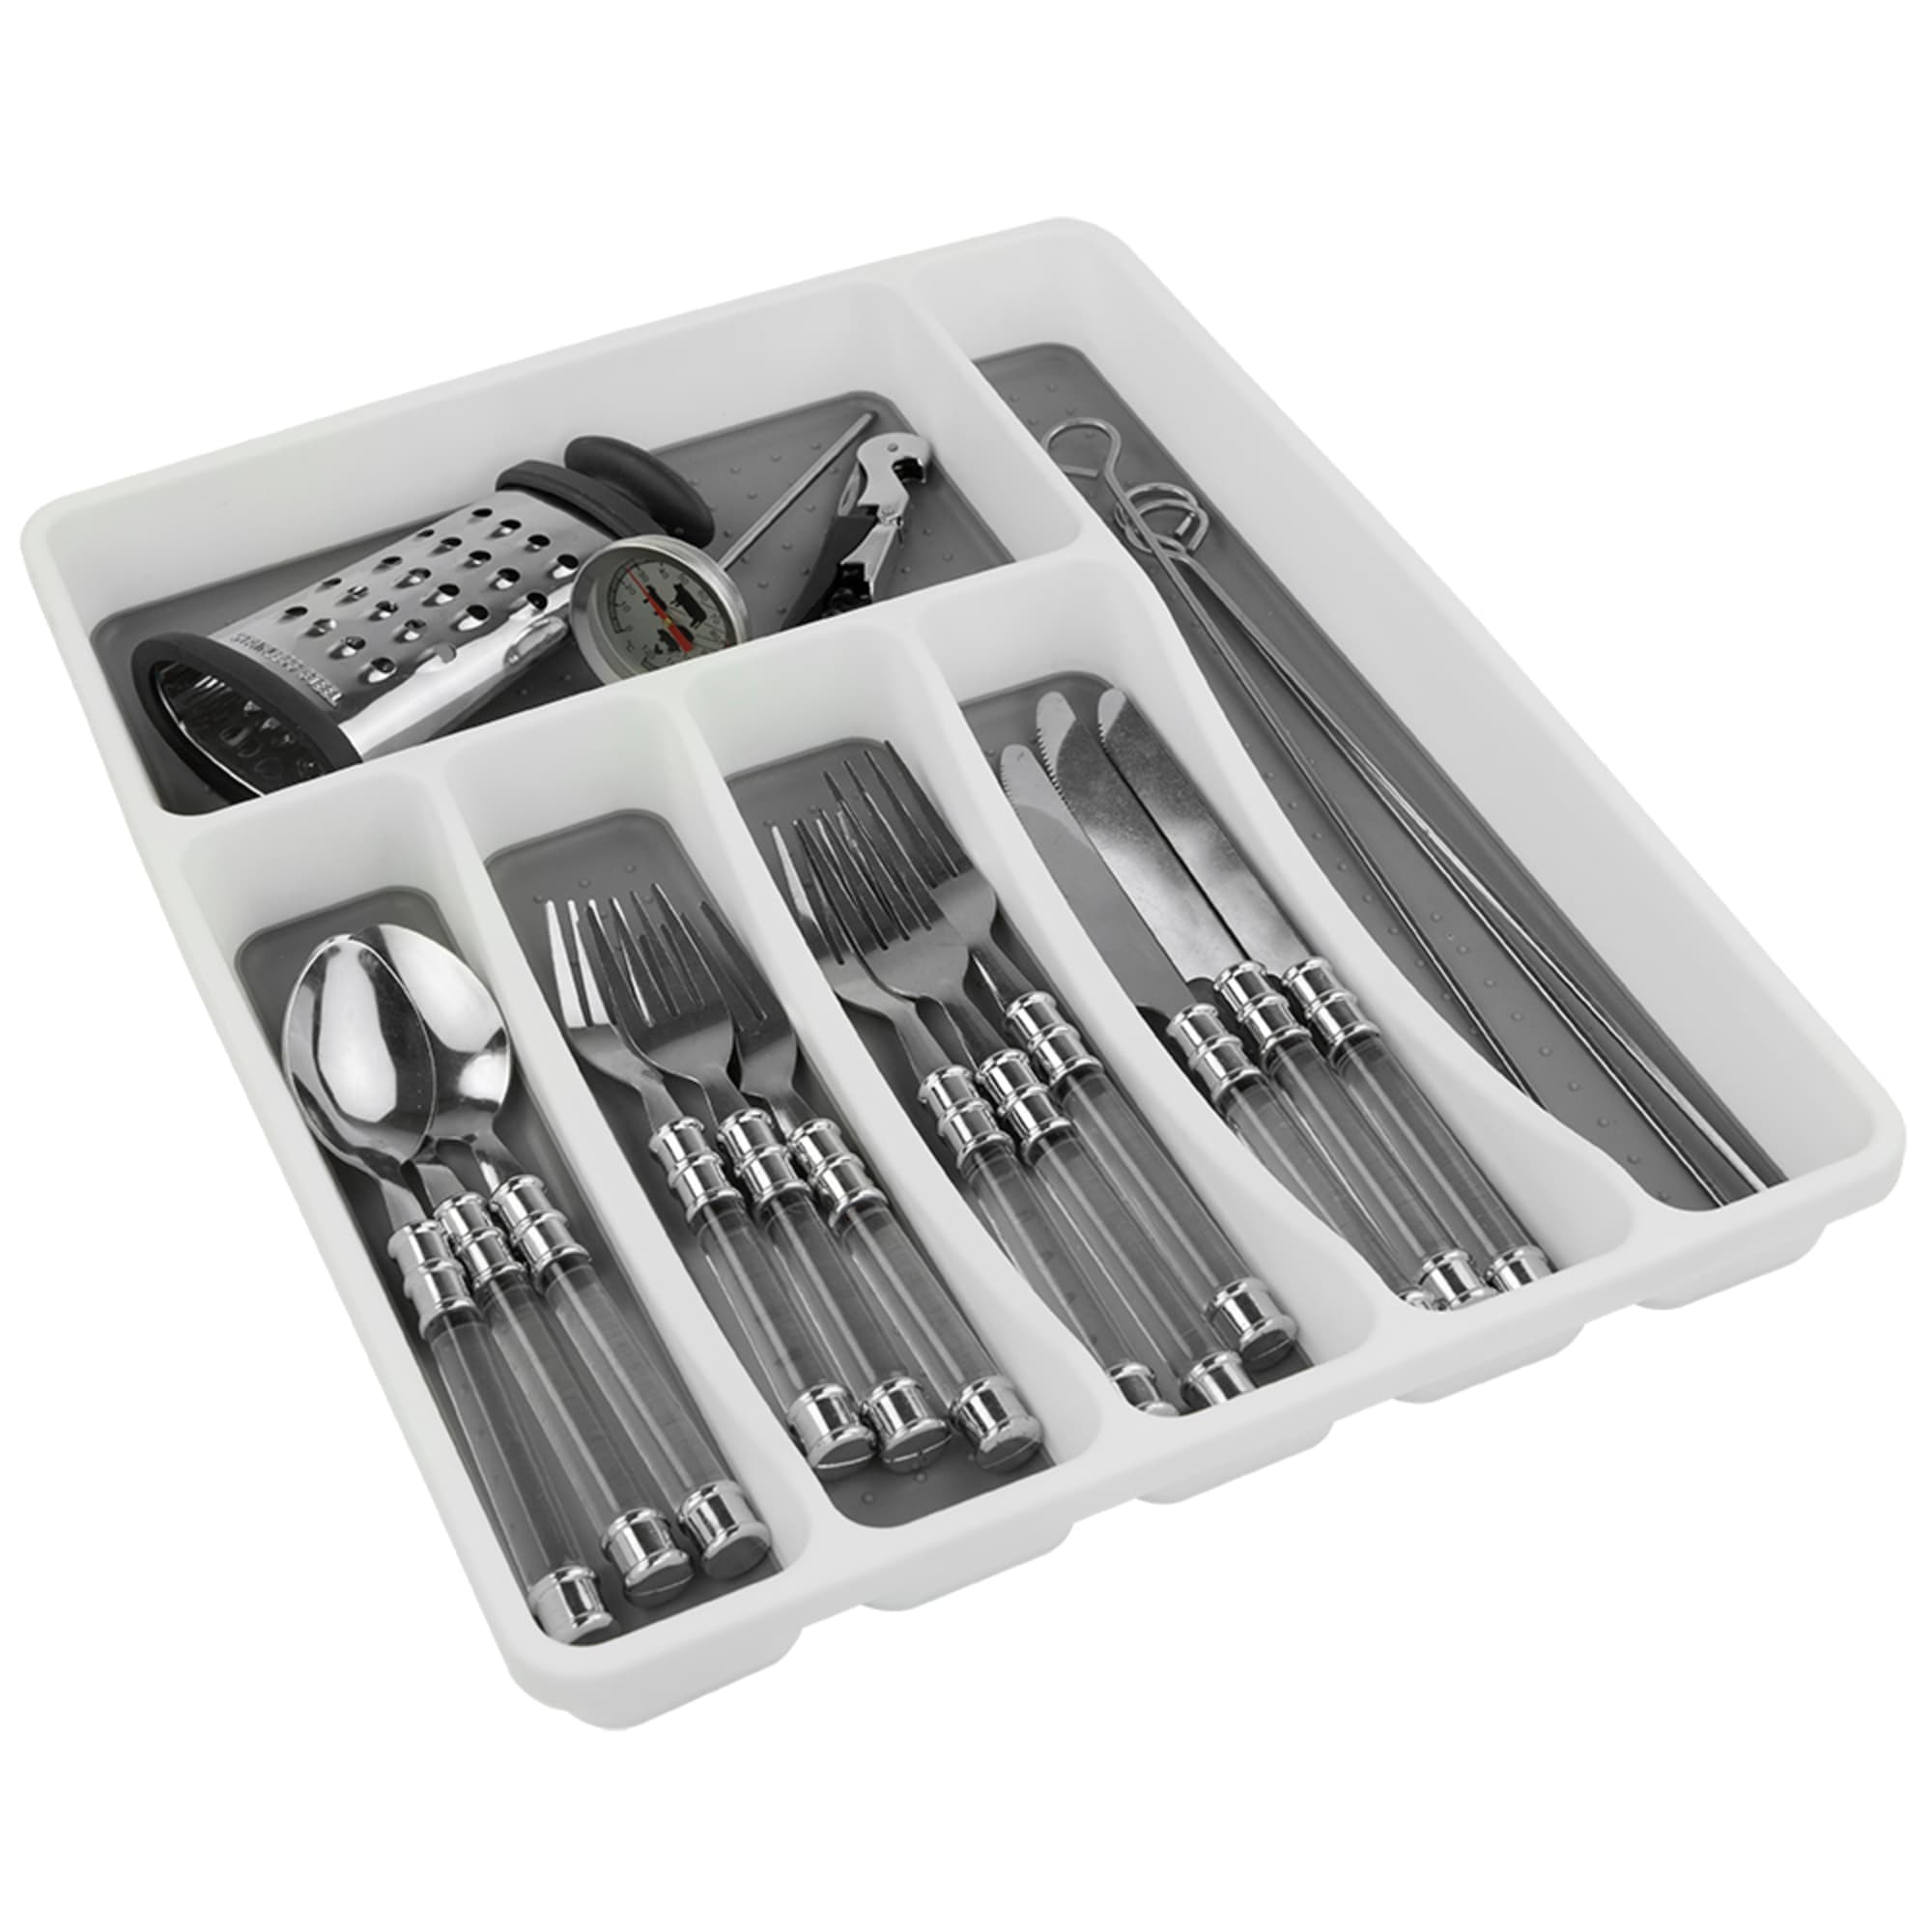 Home Basics Large Cutlery Tray with Rubber Lined Compartments, White $6.00 EACH, CASE PACK OF 12